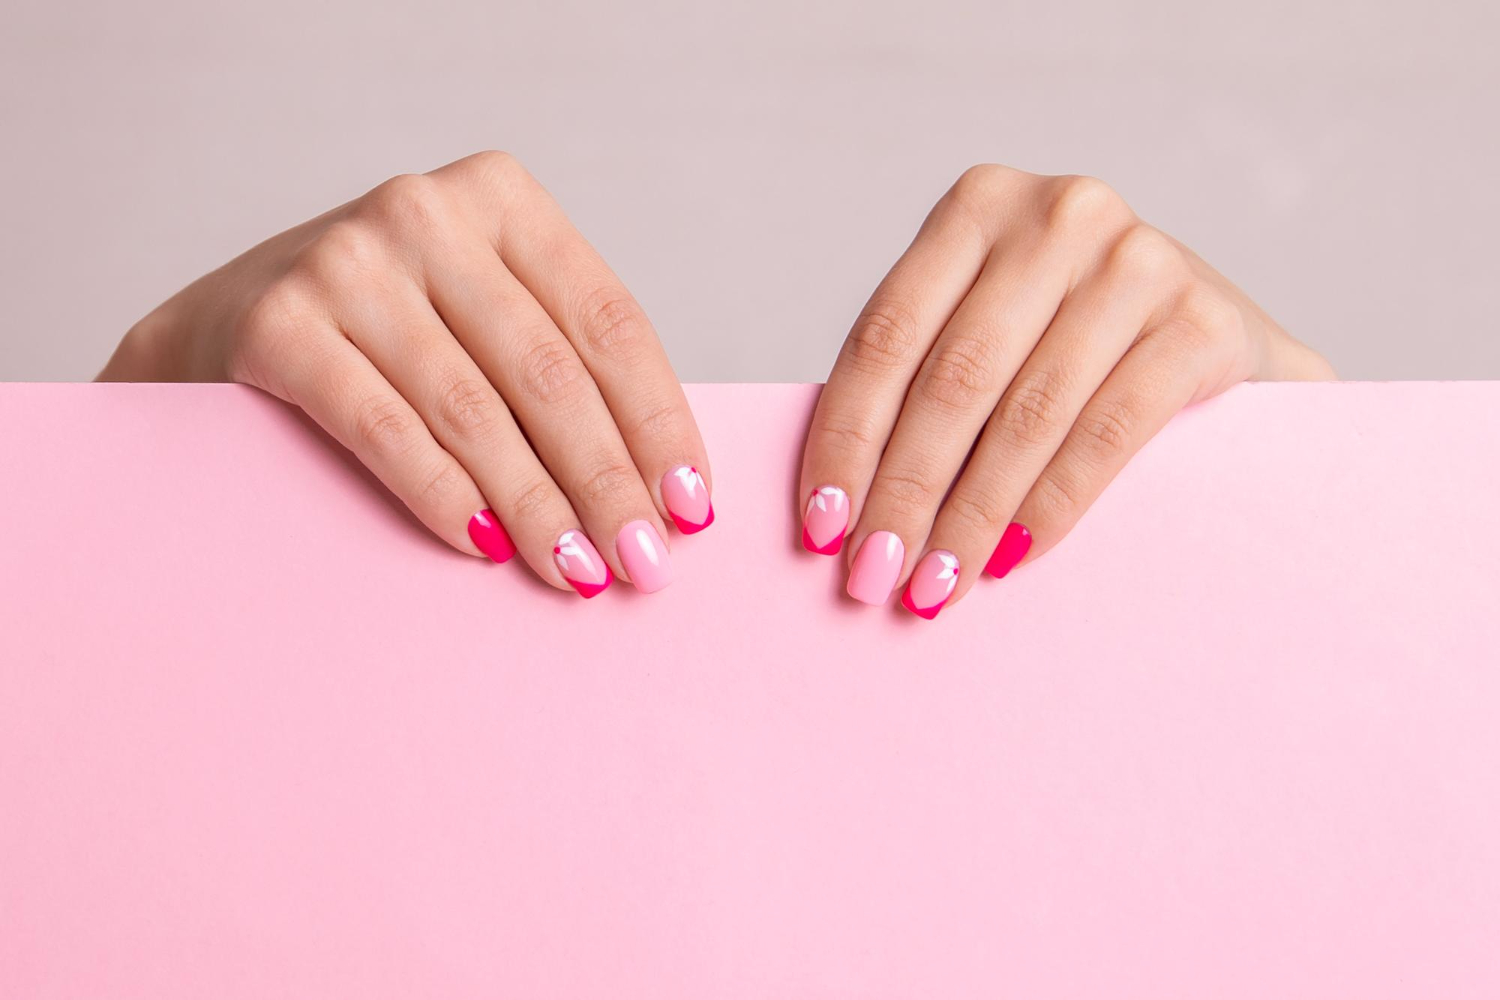 beautiful-female-hands-with-fashion-manicure-nails-flowers-design-pink-gel-polish (2)